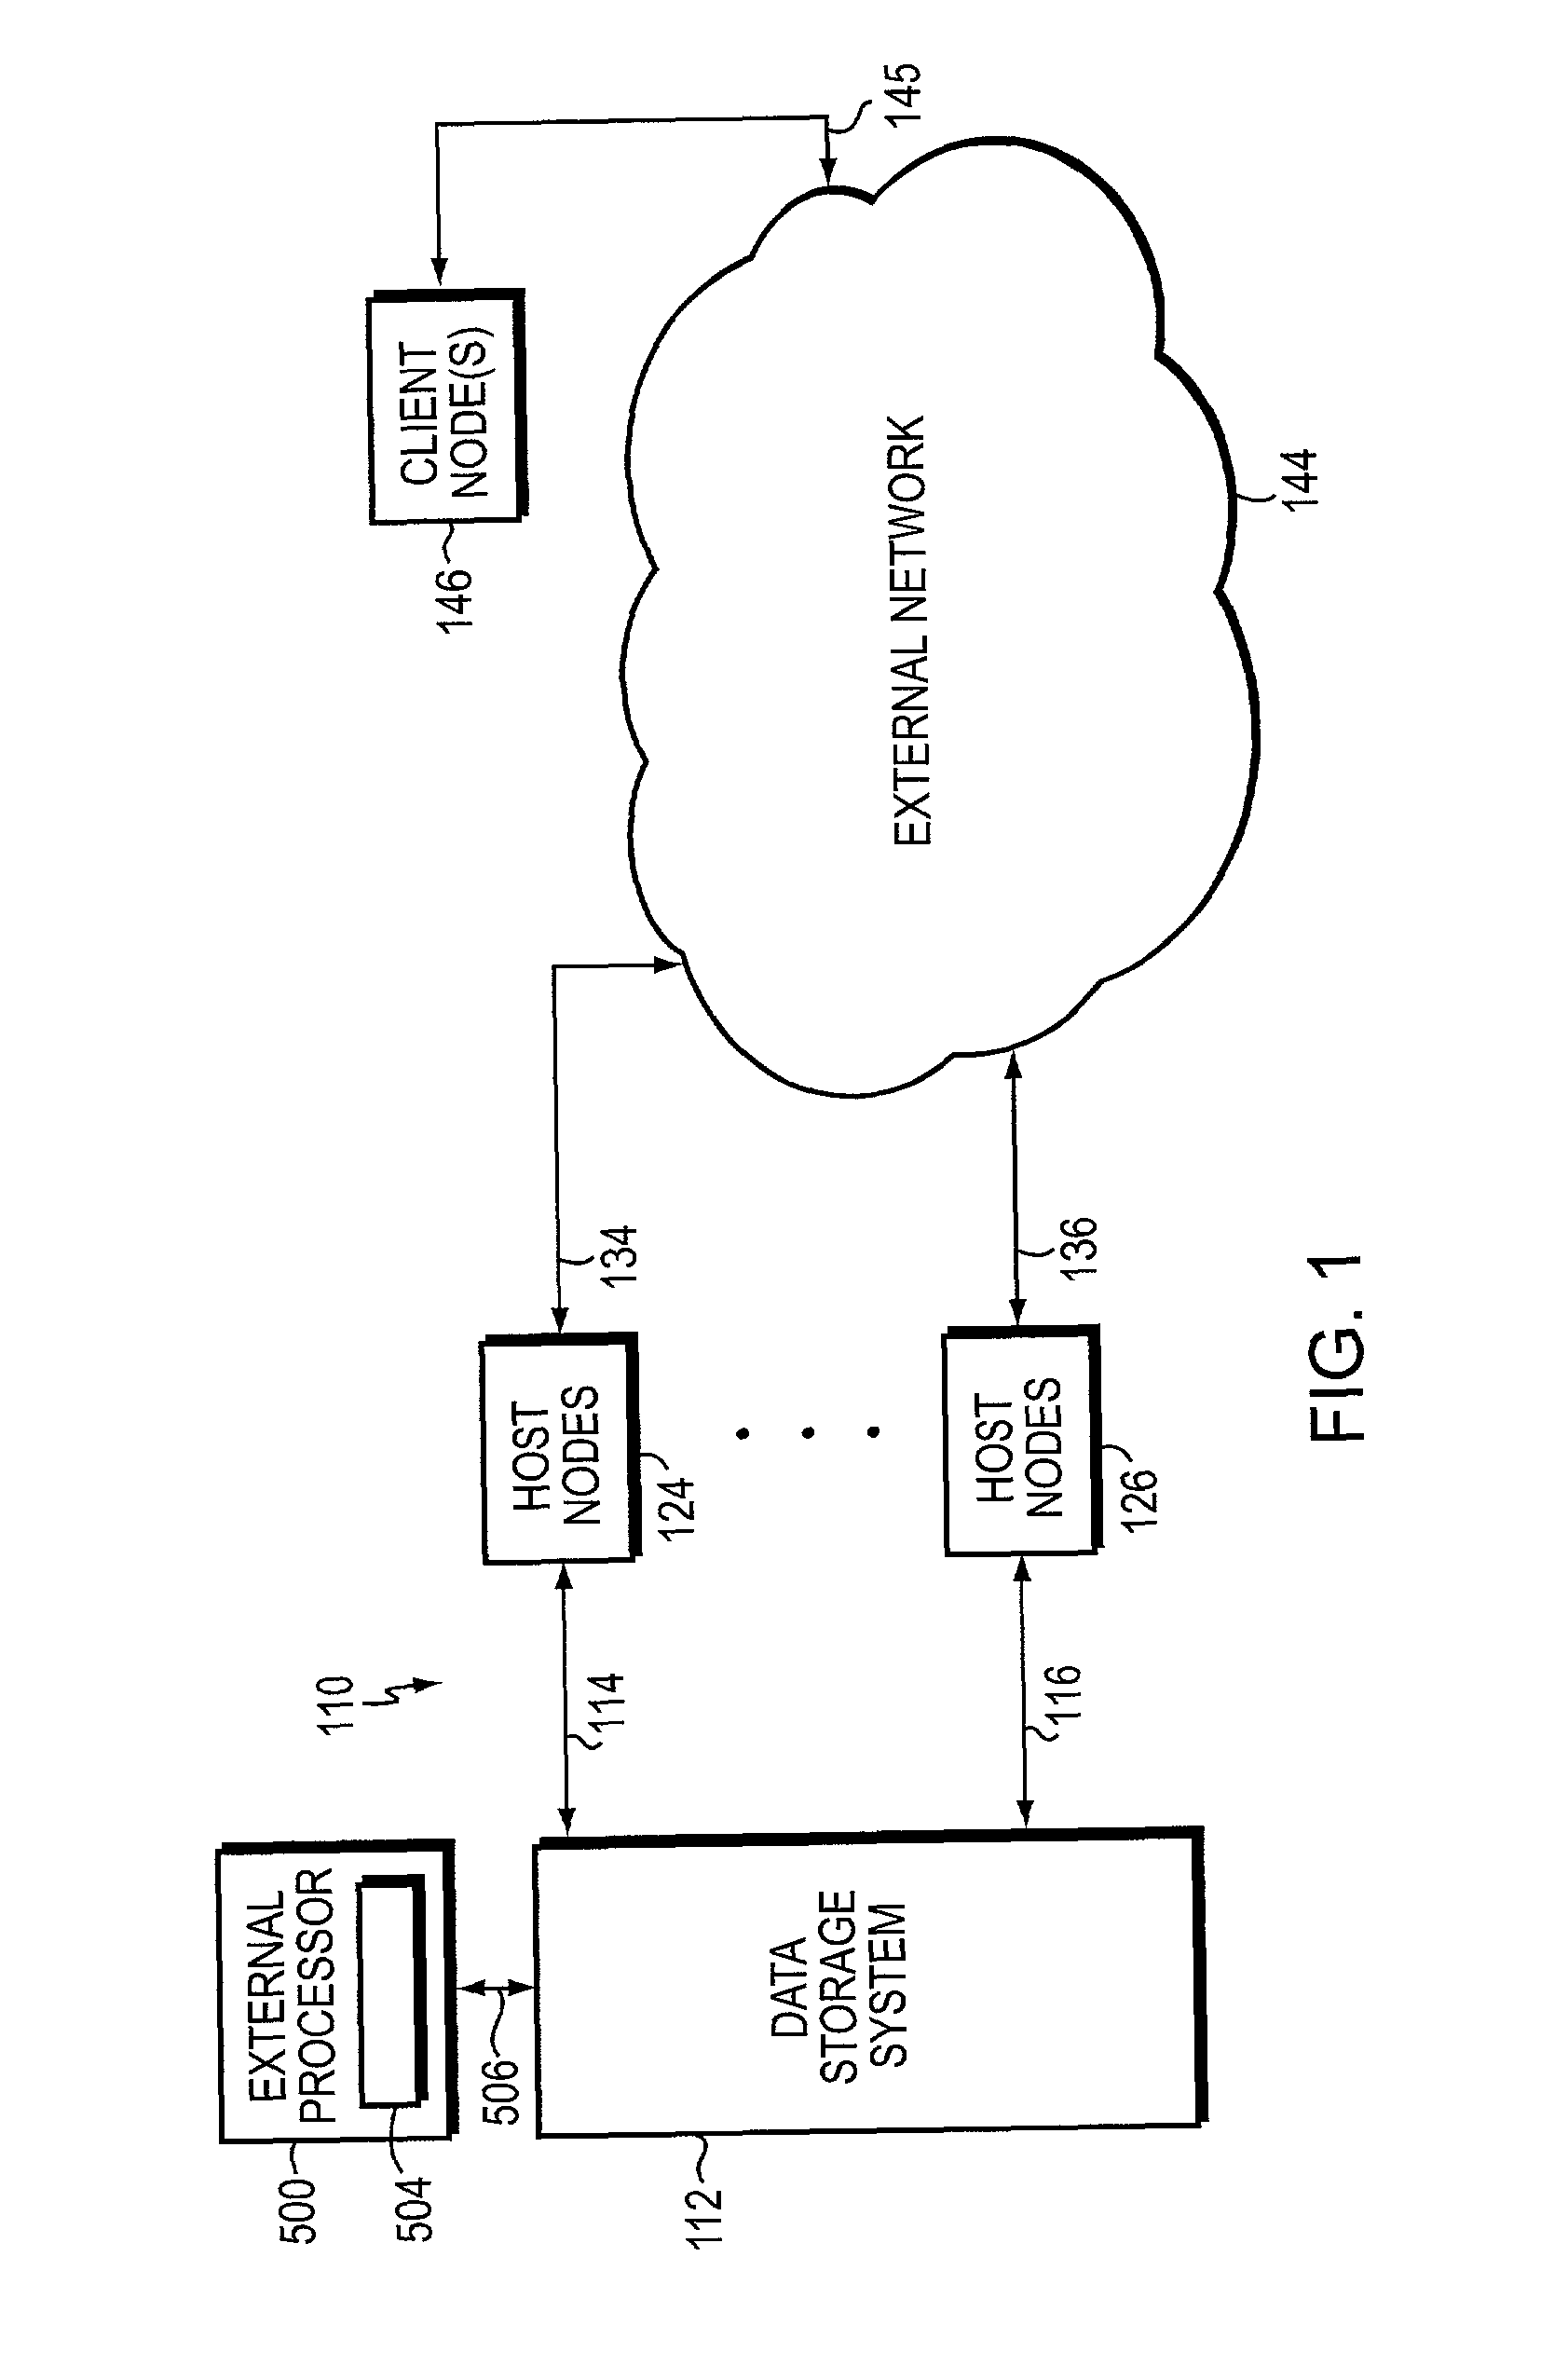 Data storage system with integrated switching